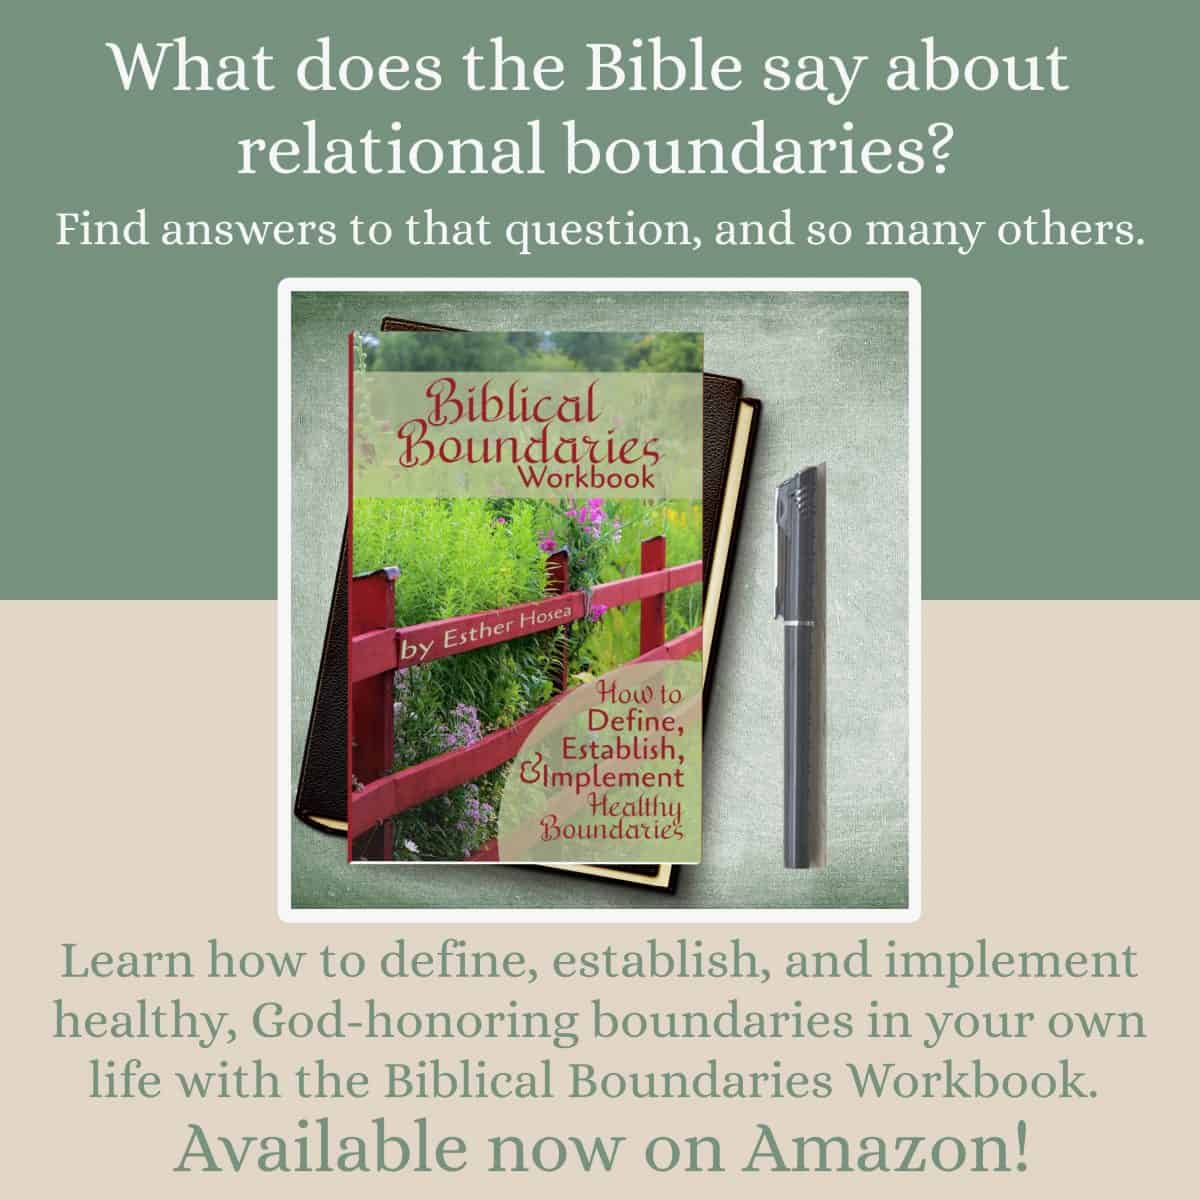 Link to the Biblical Boundaries Workbook (help for those looking to implement healthy, God honoring boundaries while recovering from betrayal trauma) on Amazon.